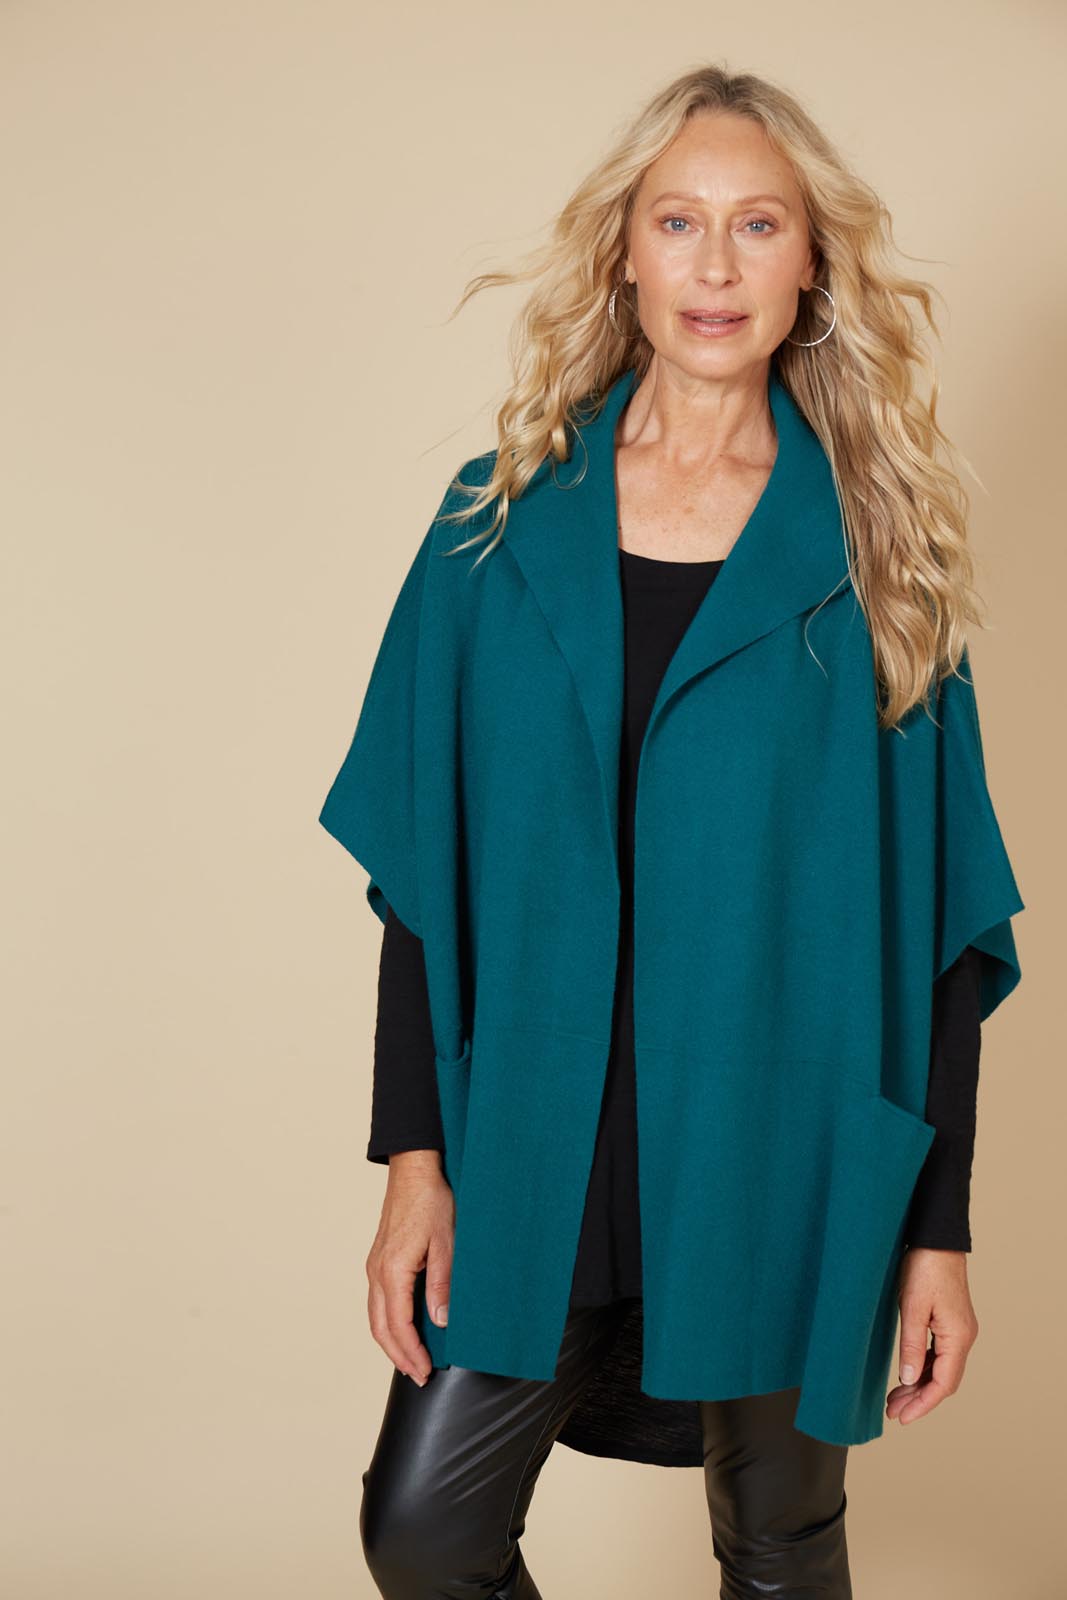 Kit Cape - Teal - eb&ive Clothing - Knit Cape One Size